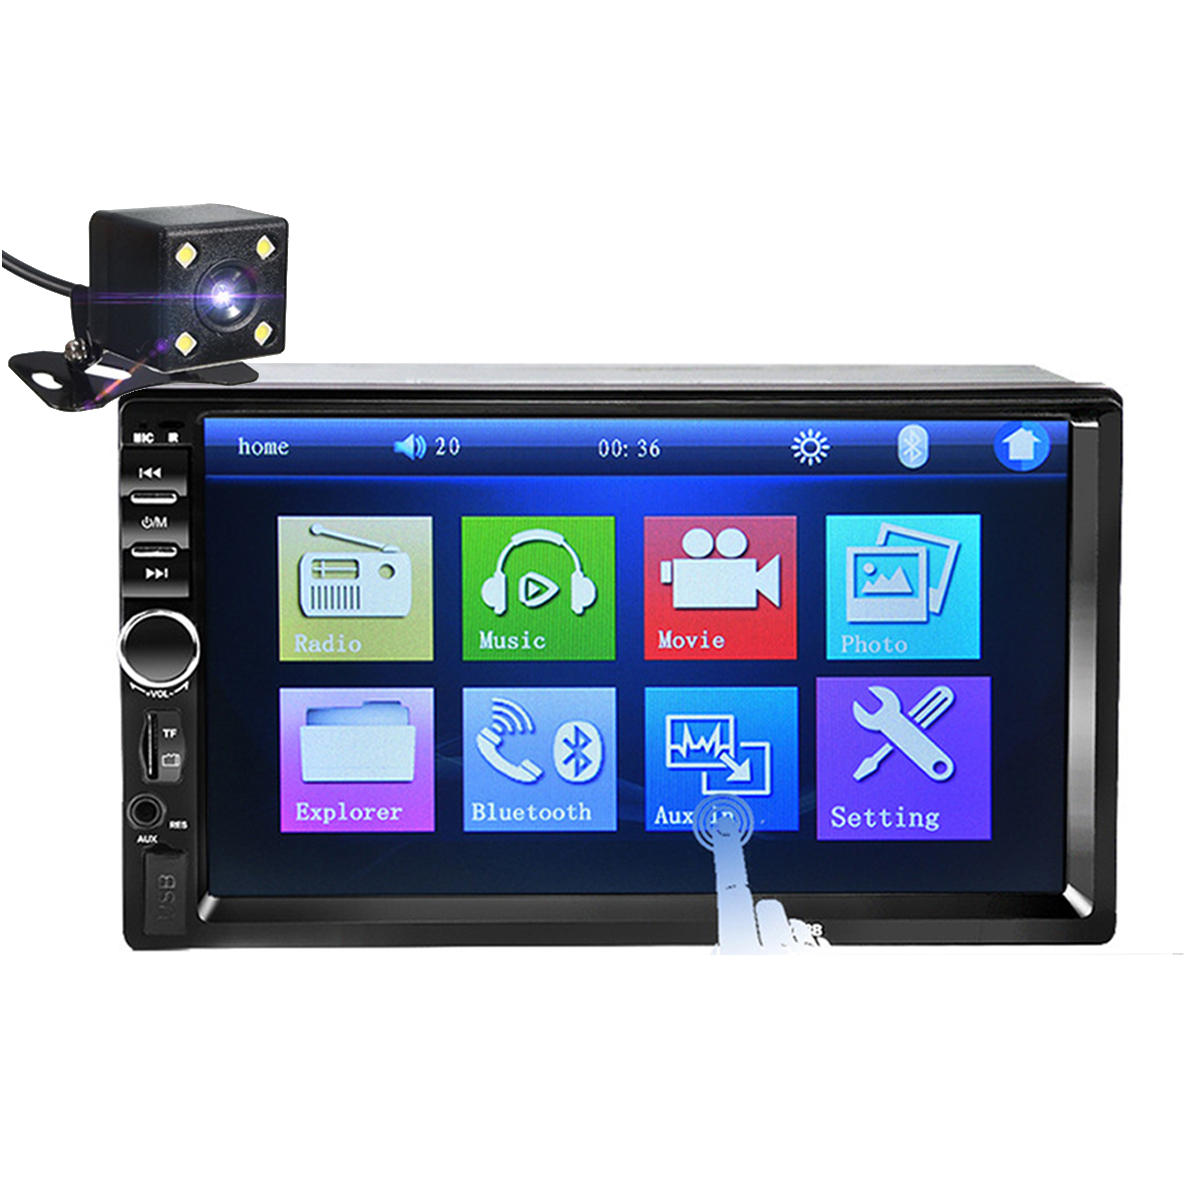 Car Stereo 7' HD touch Screen Auto Radio with Bluetooth MP3/MP4 Handsfree Call